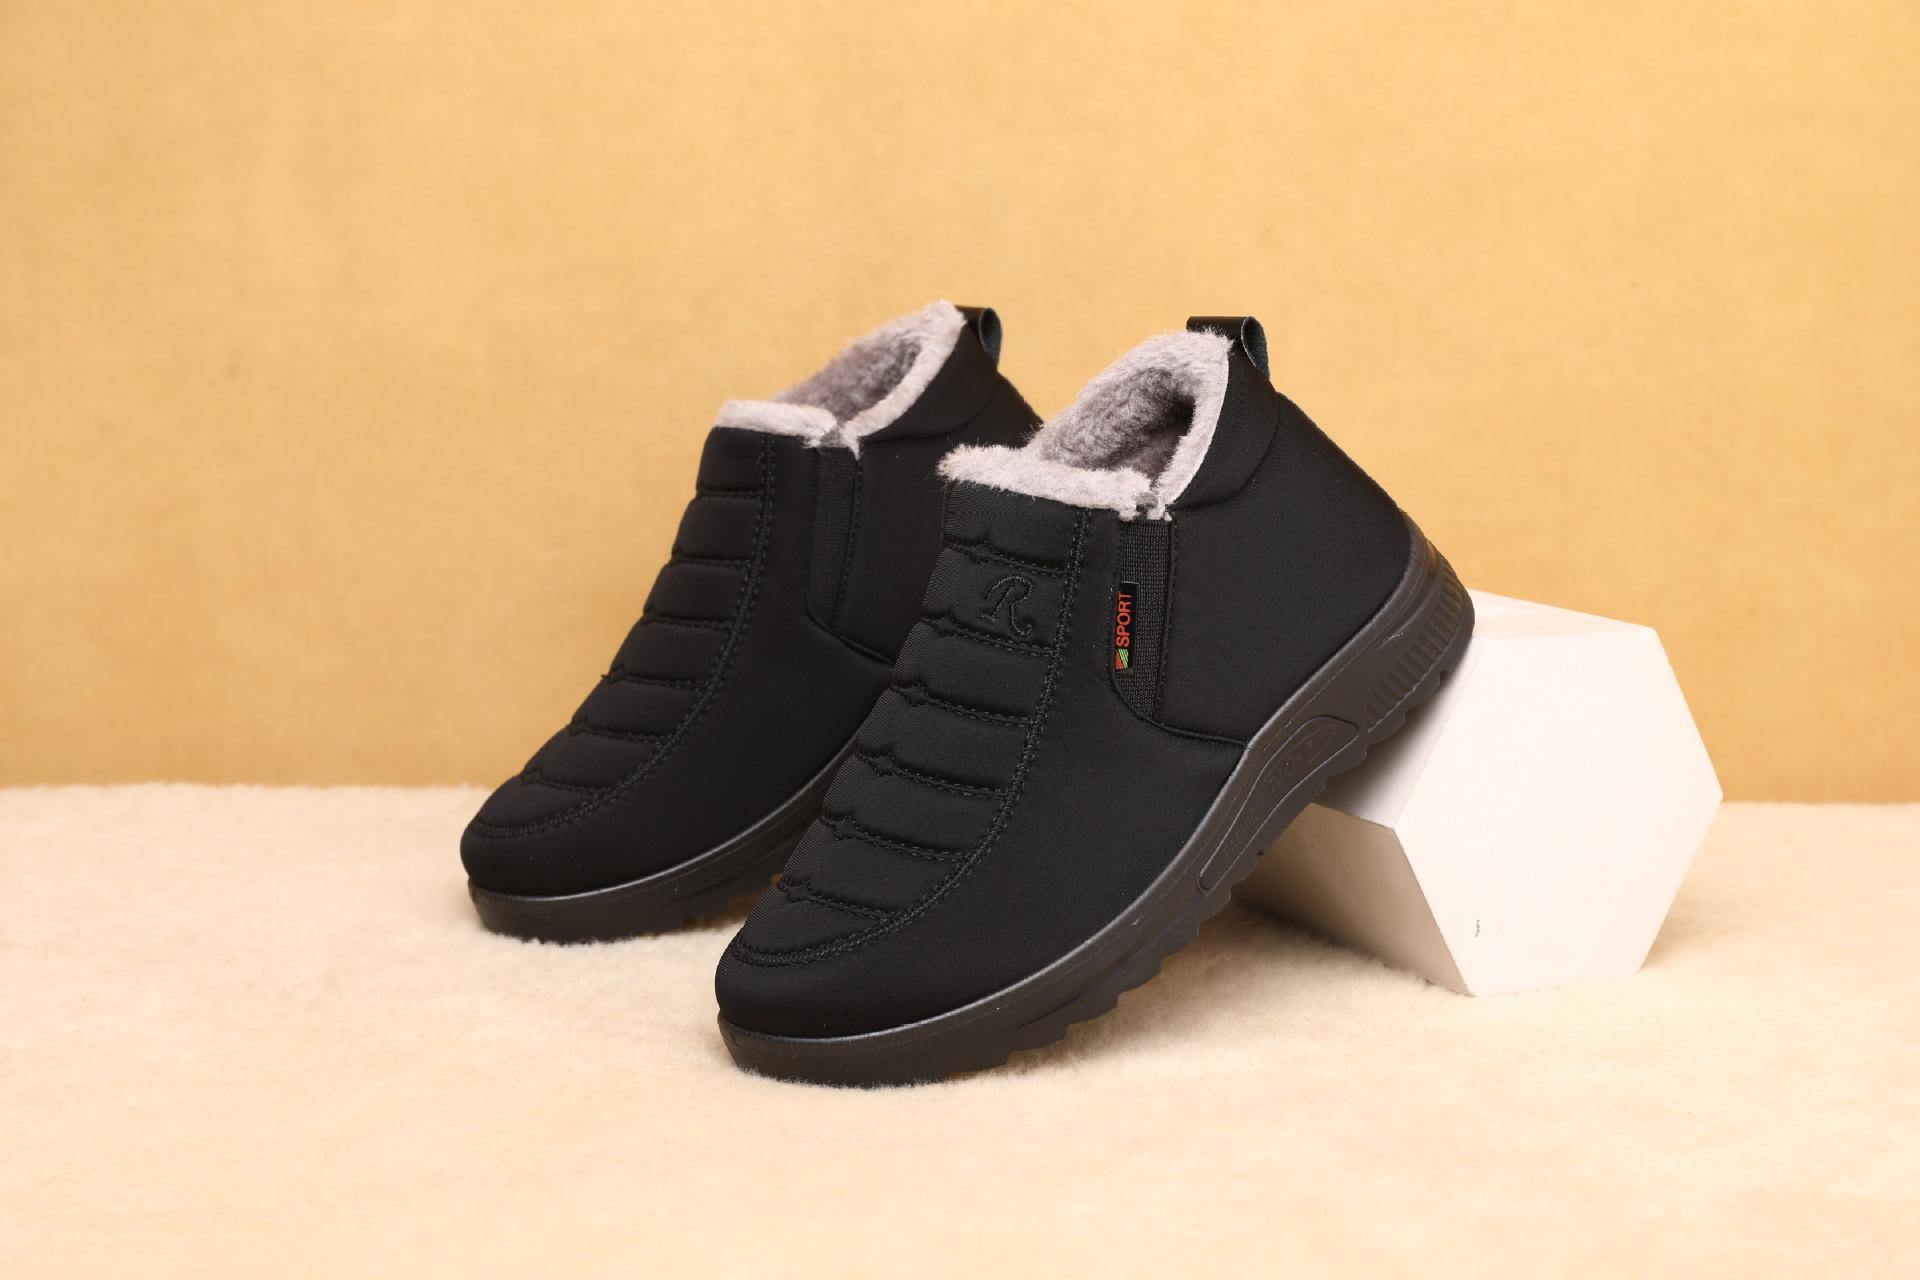 Winter Fleece-lined Thick High-Top Middle-Aged and Elderly Men's and Women's Cotton Shoes Warm Non-Slip Mom and Dad Shoes Extra Thick Elderly Cotton-Padded Shoes